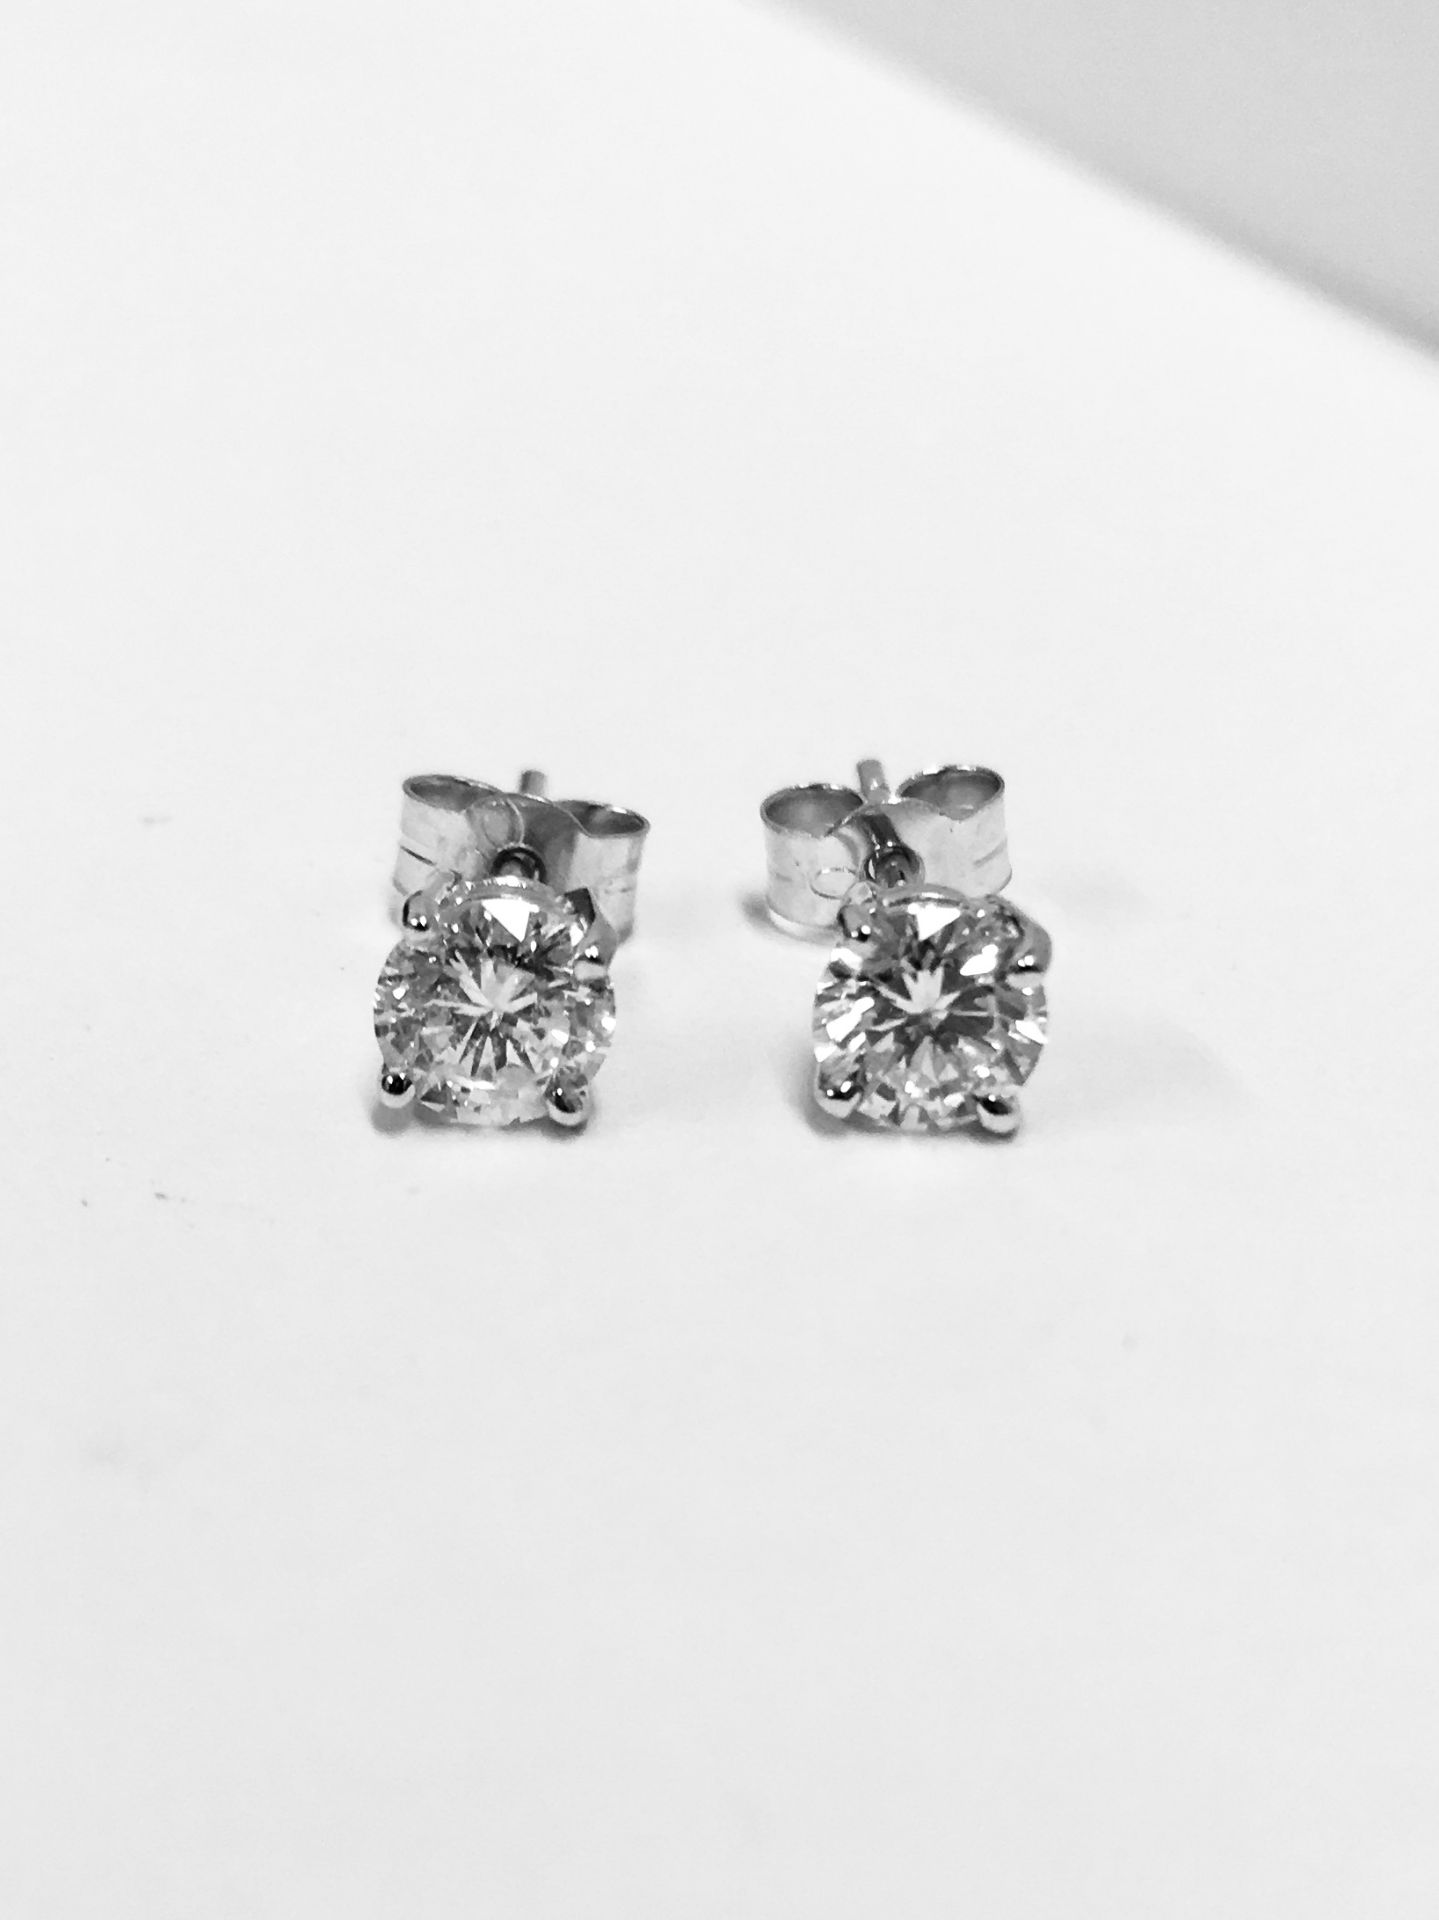 1ct diamond soliataire earrings2x0.50ct h colour vs grade diamonds ,18ct white gold 2gms uk made - Image 4 of 4